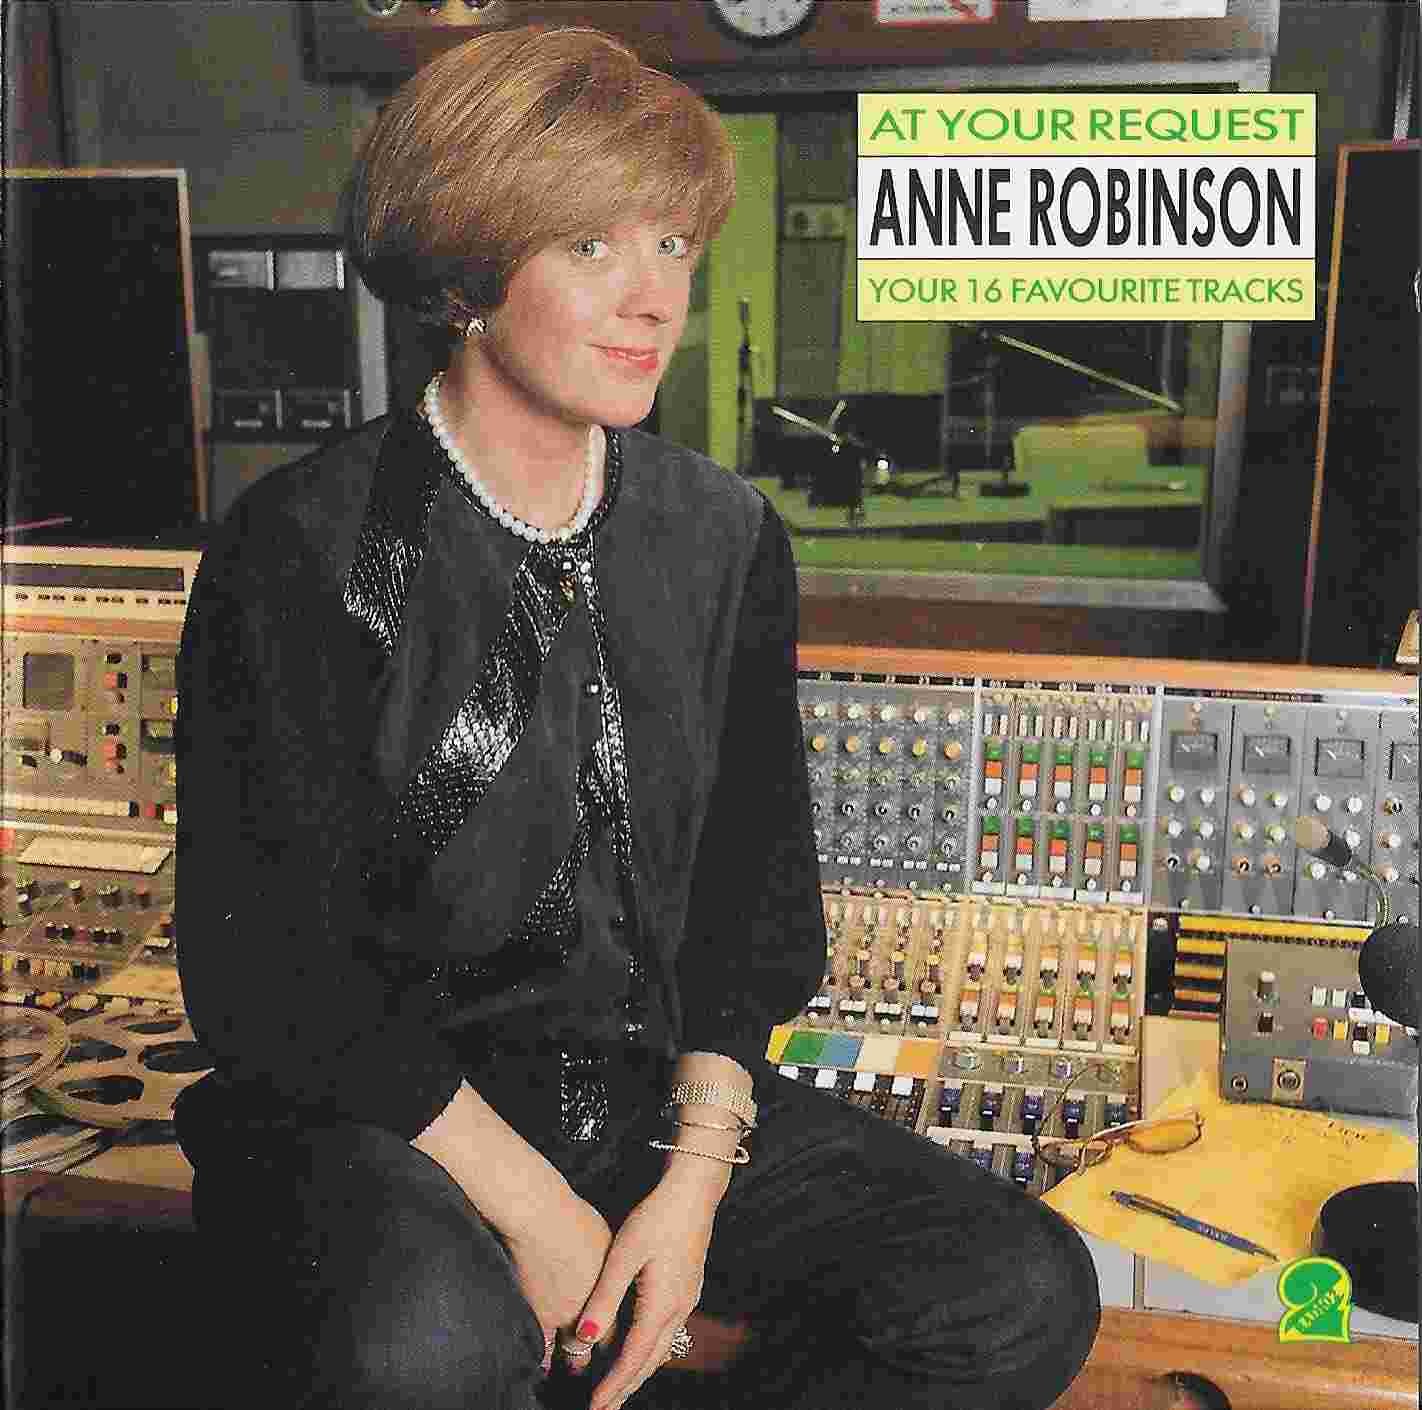 Picture of At your request - Anne Robinson by artist Various from the BBC cds - Records and Tapes library